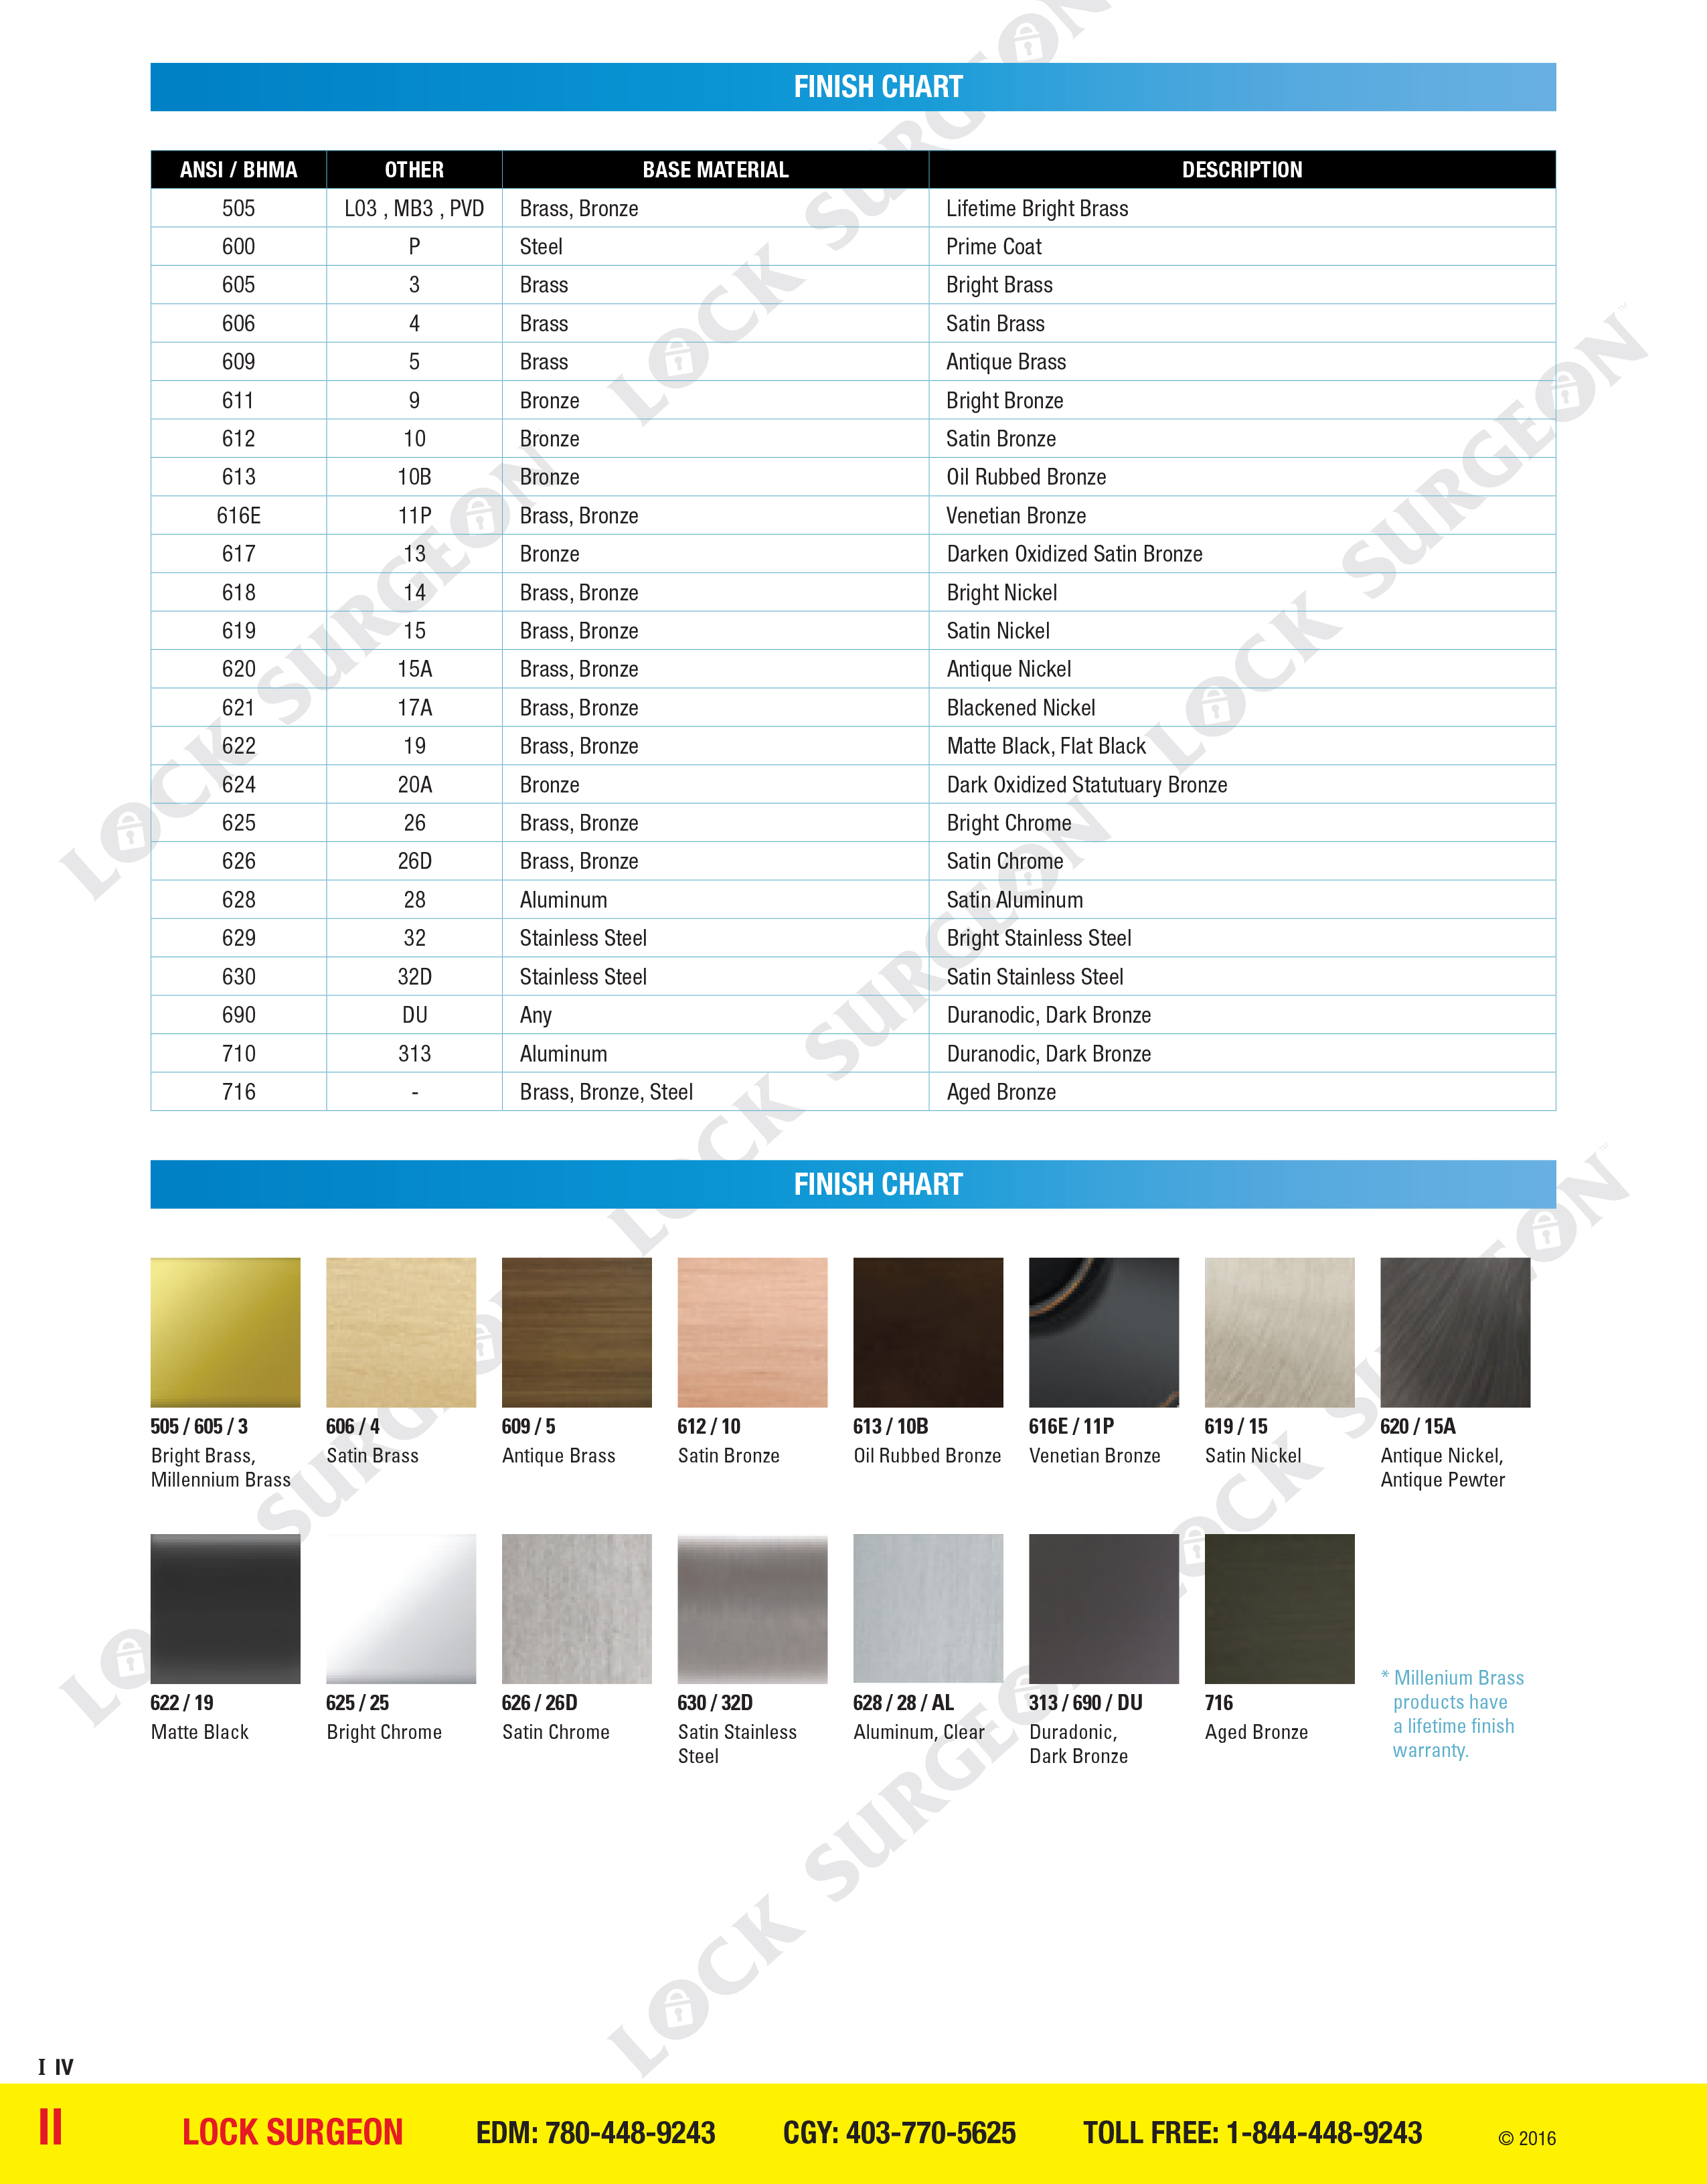 Colour reference chart for colour finishes on door handle hardware products Sherwood Park.